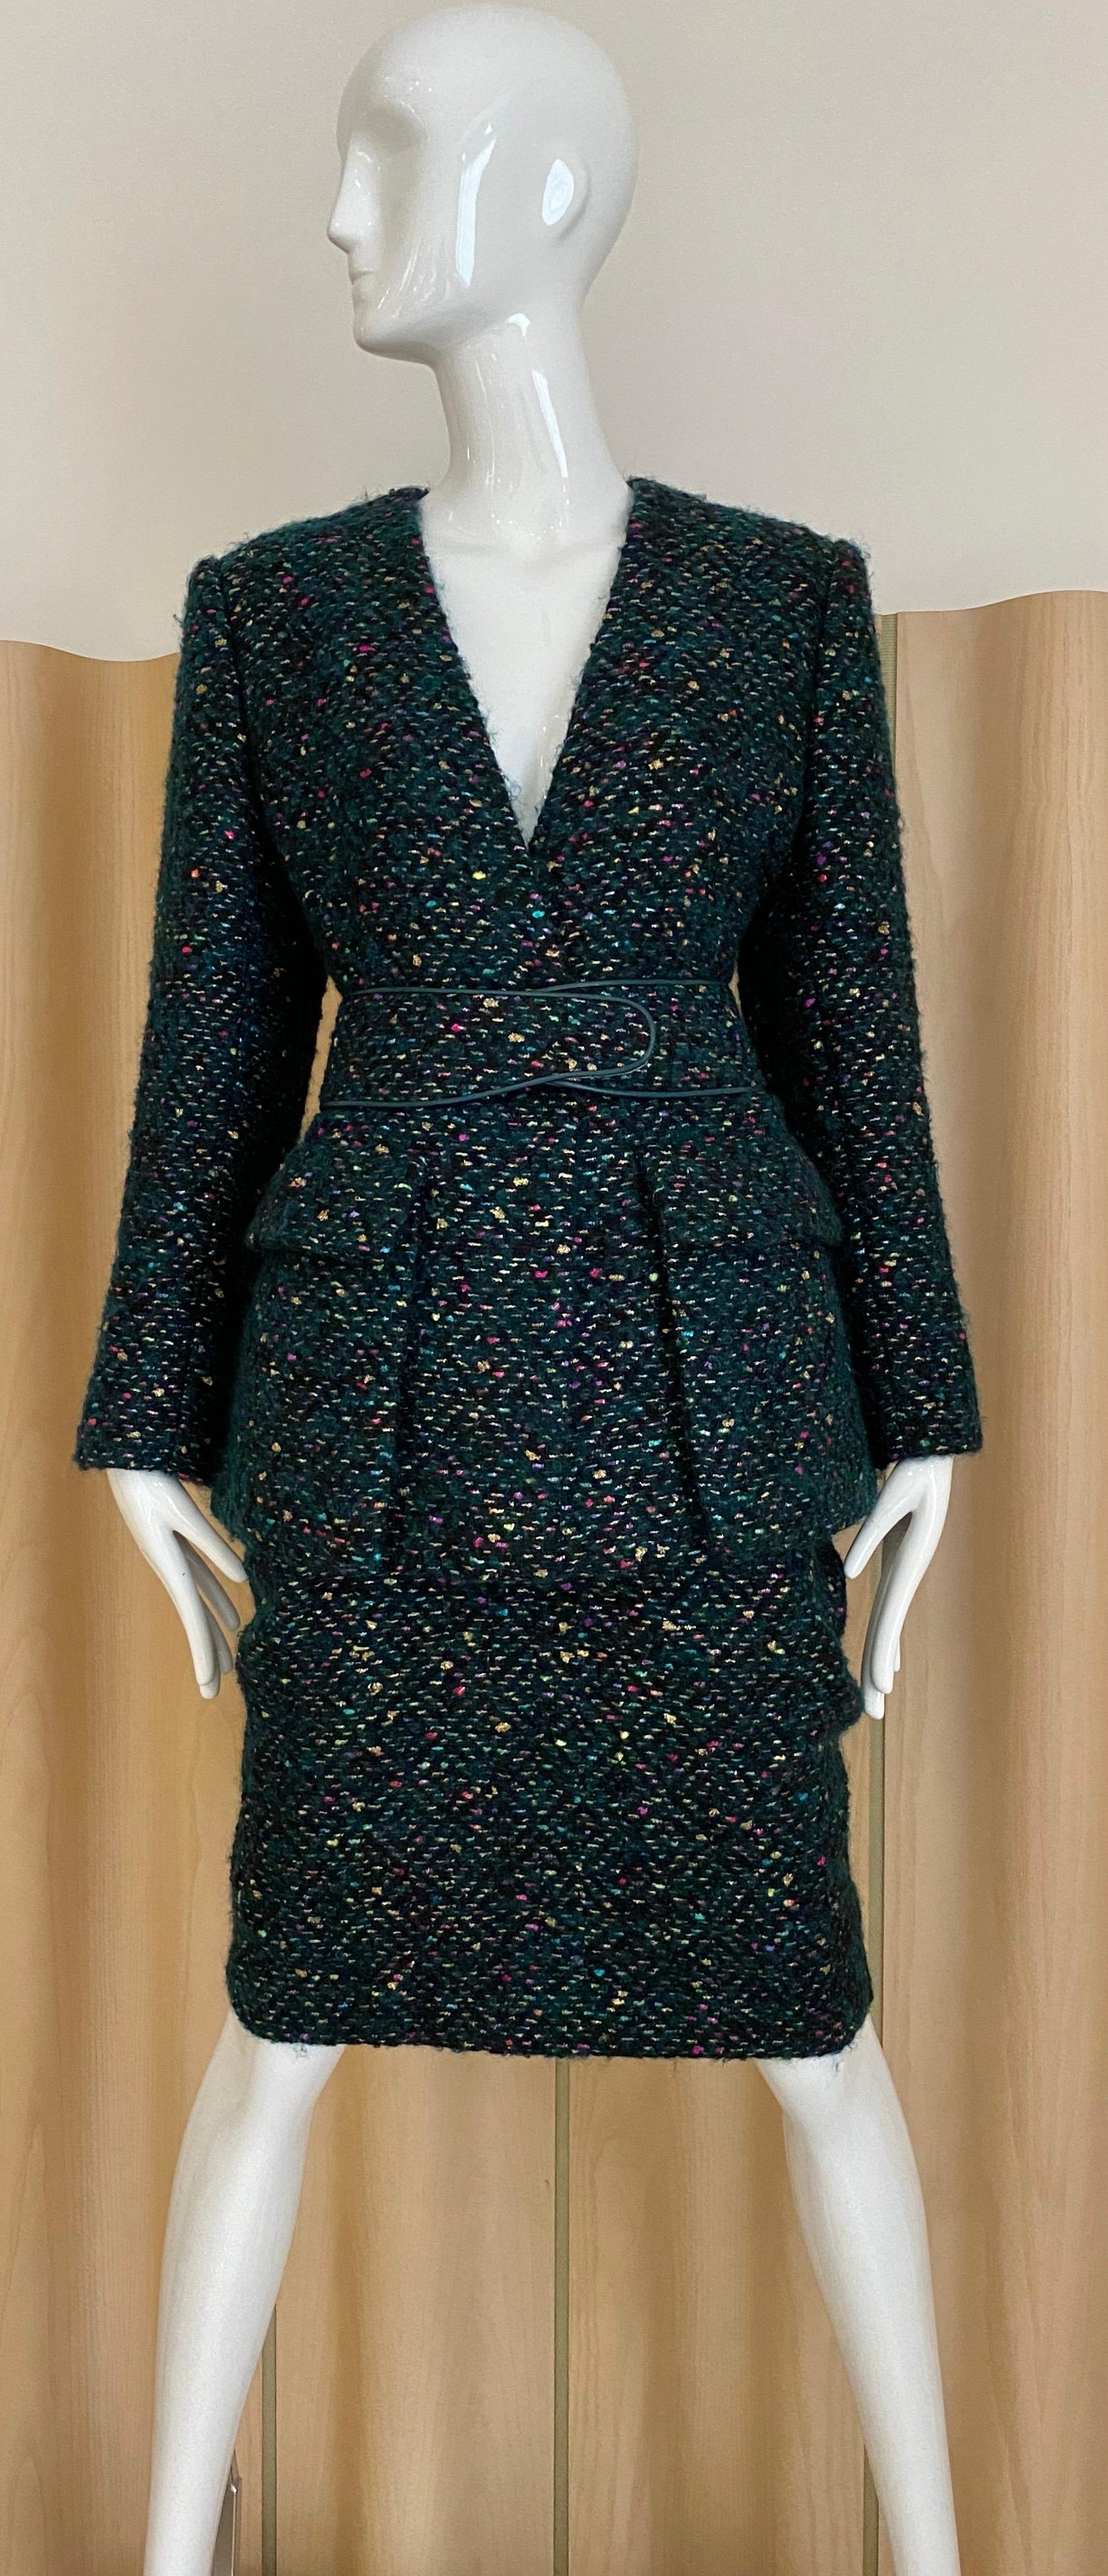 Vintage Galanos Skirt Suit from the 1960’s in a cashmere and wool boucle with metallic threads woven into it. Jacket has a v neck no collar, one center button, two
flap patch pockets and a contoured belt trimmed in leather and metal fasteners. Knee